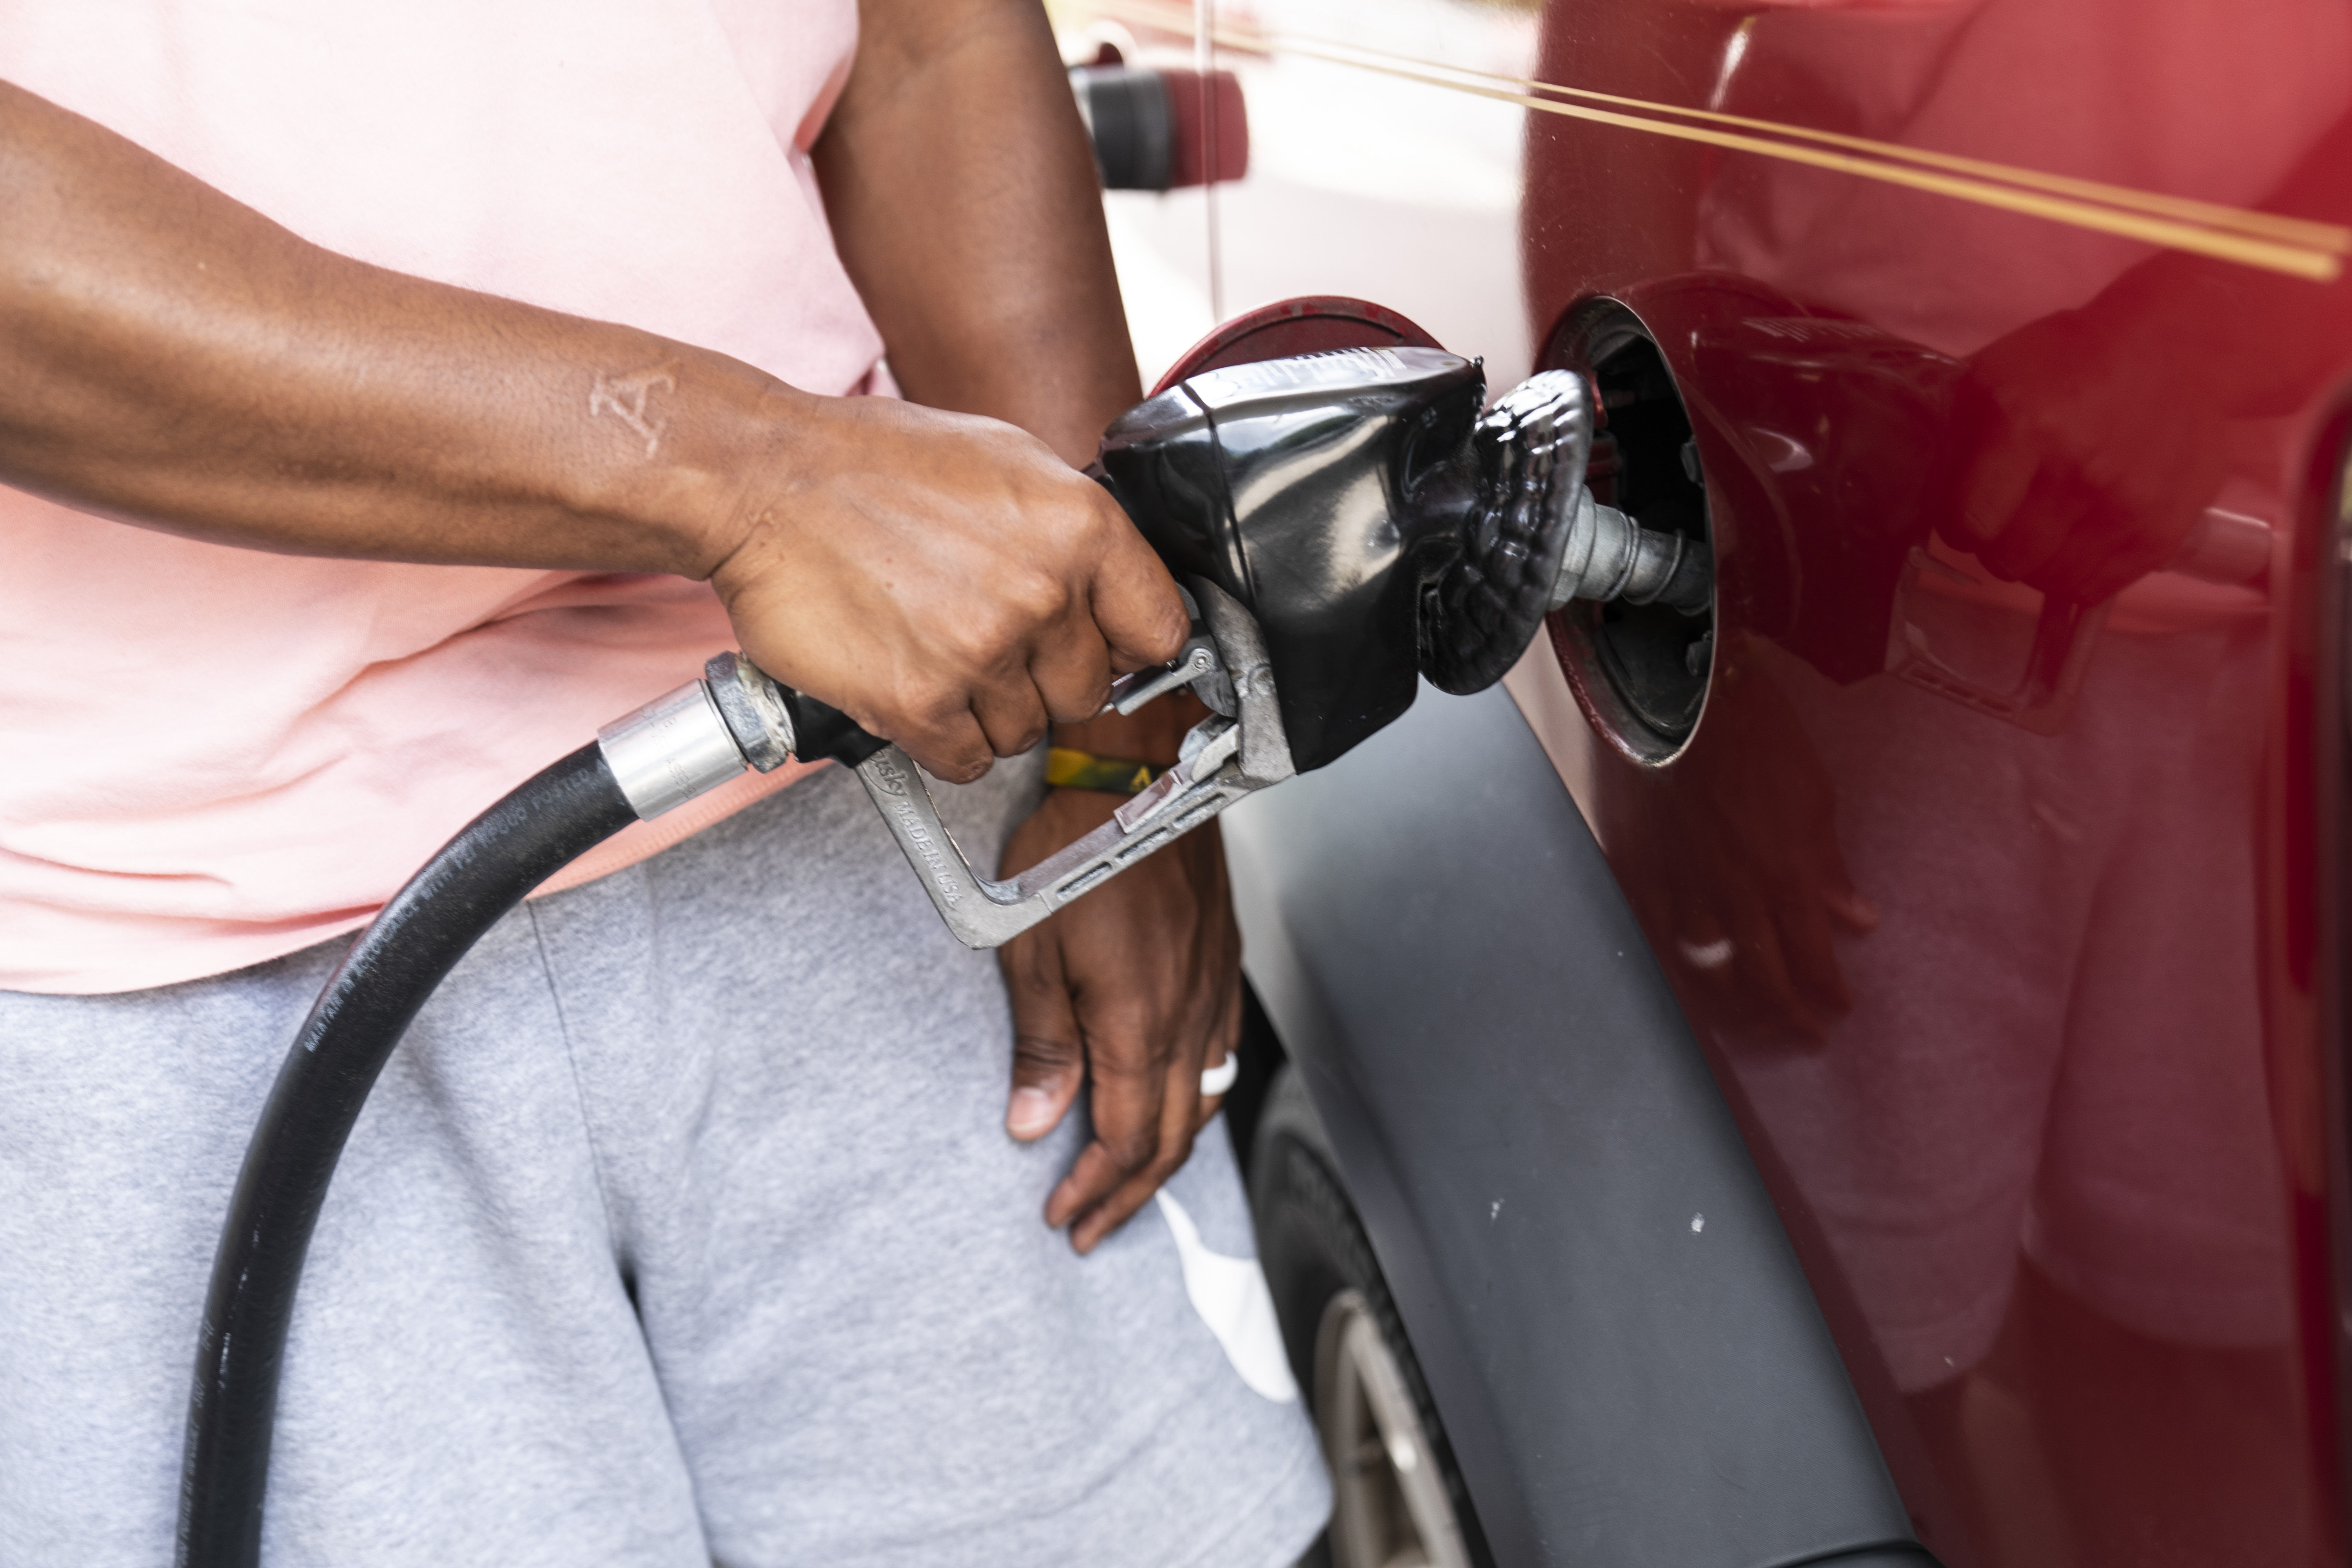 A customer refuels a vehicle at a Wawa gas station in Annapolis, Maryland, on May 28.